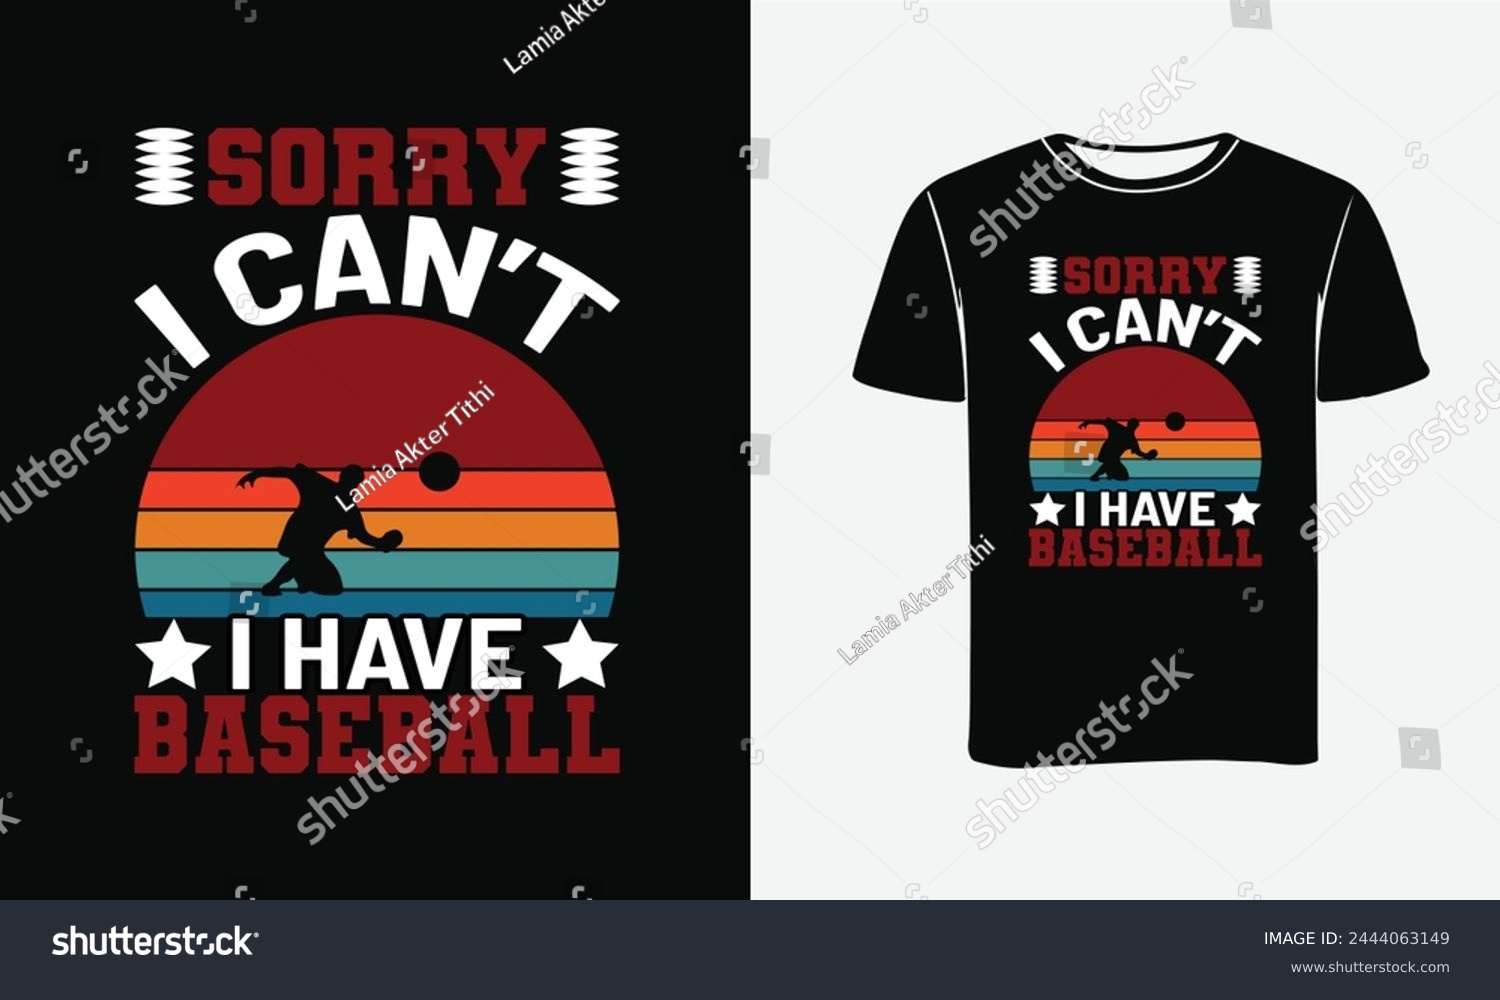 SVG of Sorry I can't I have baseball, Baseball t-shirt Custom Vector Art . Baseball Design Gifts For Family, Gaming Quote, Funny Baseball Design - Vector graphics, typographic posters, or banners svg